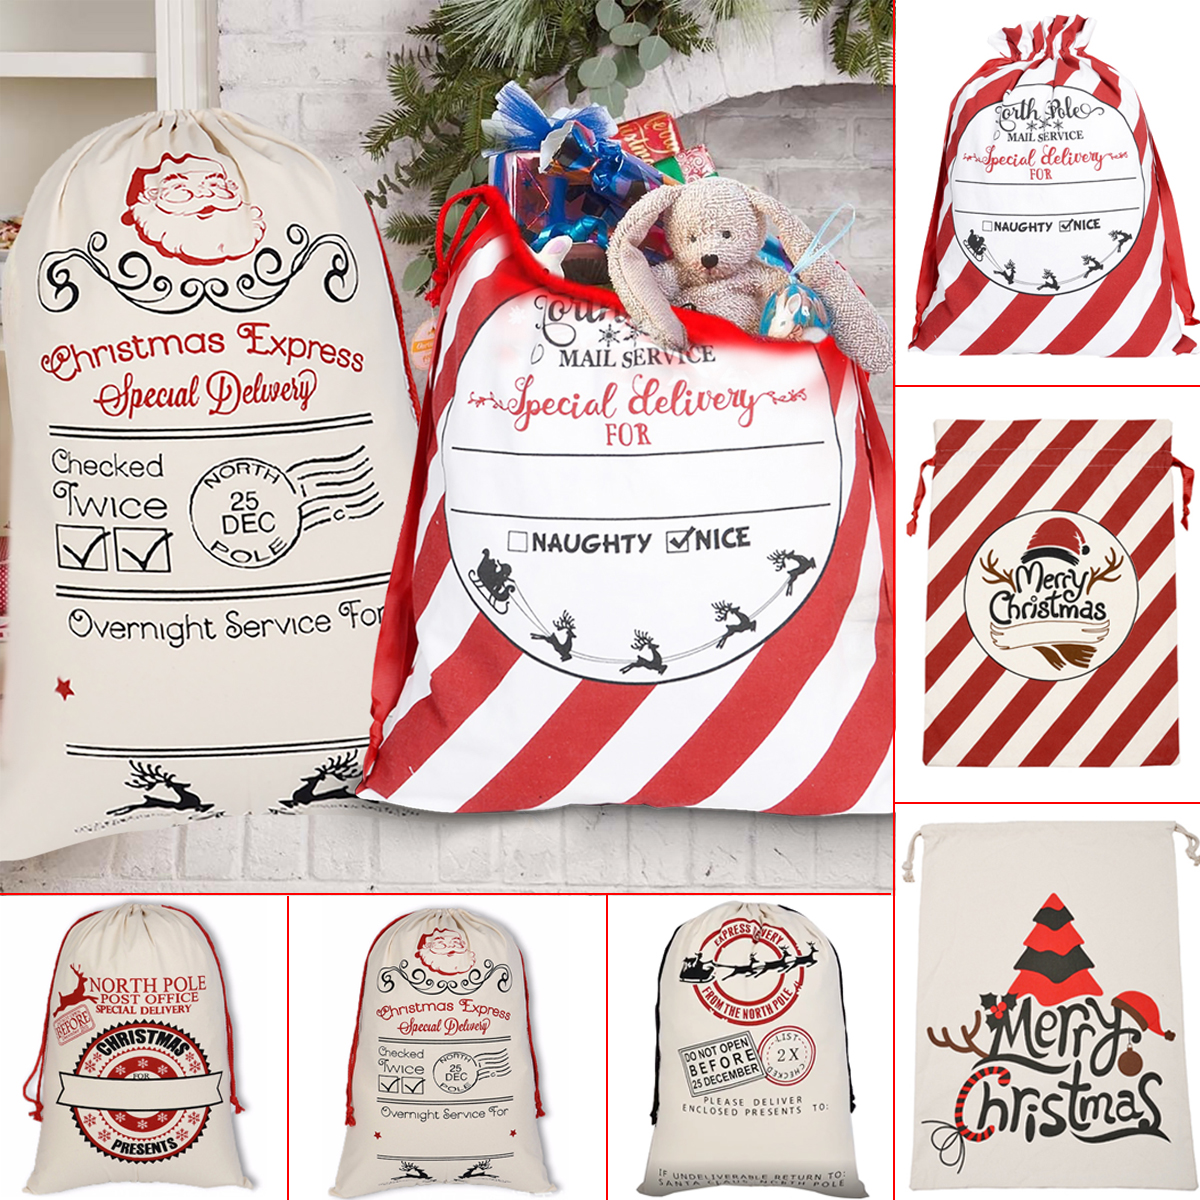 Santa-Sack-Canvas-Bag-Party-Christmas-Candy-Bags-Xmas-Decorations-for-Kids-Gift-1589089-1